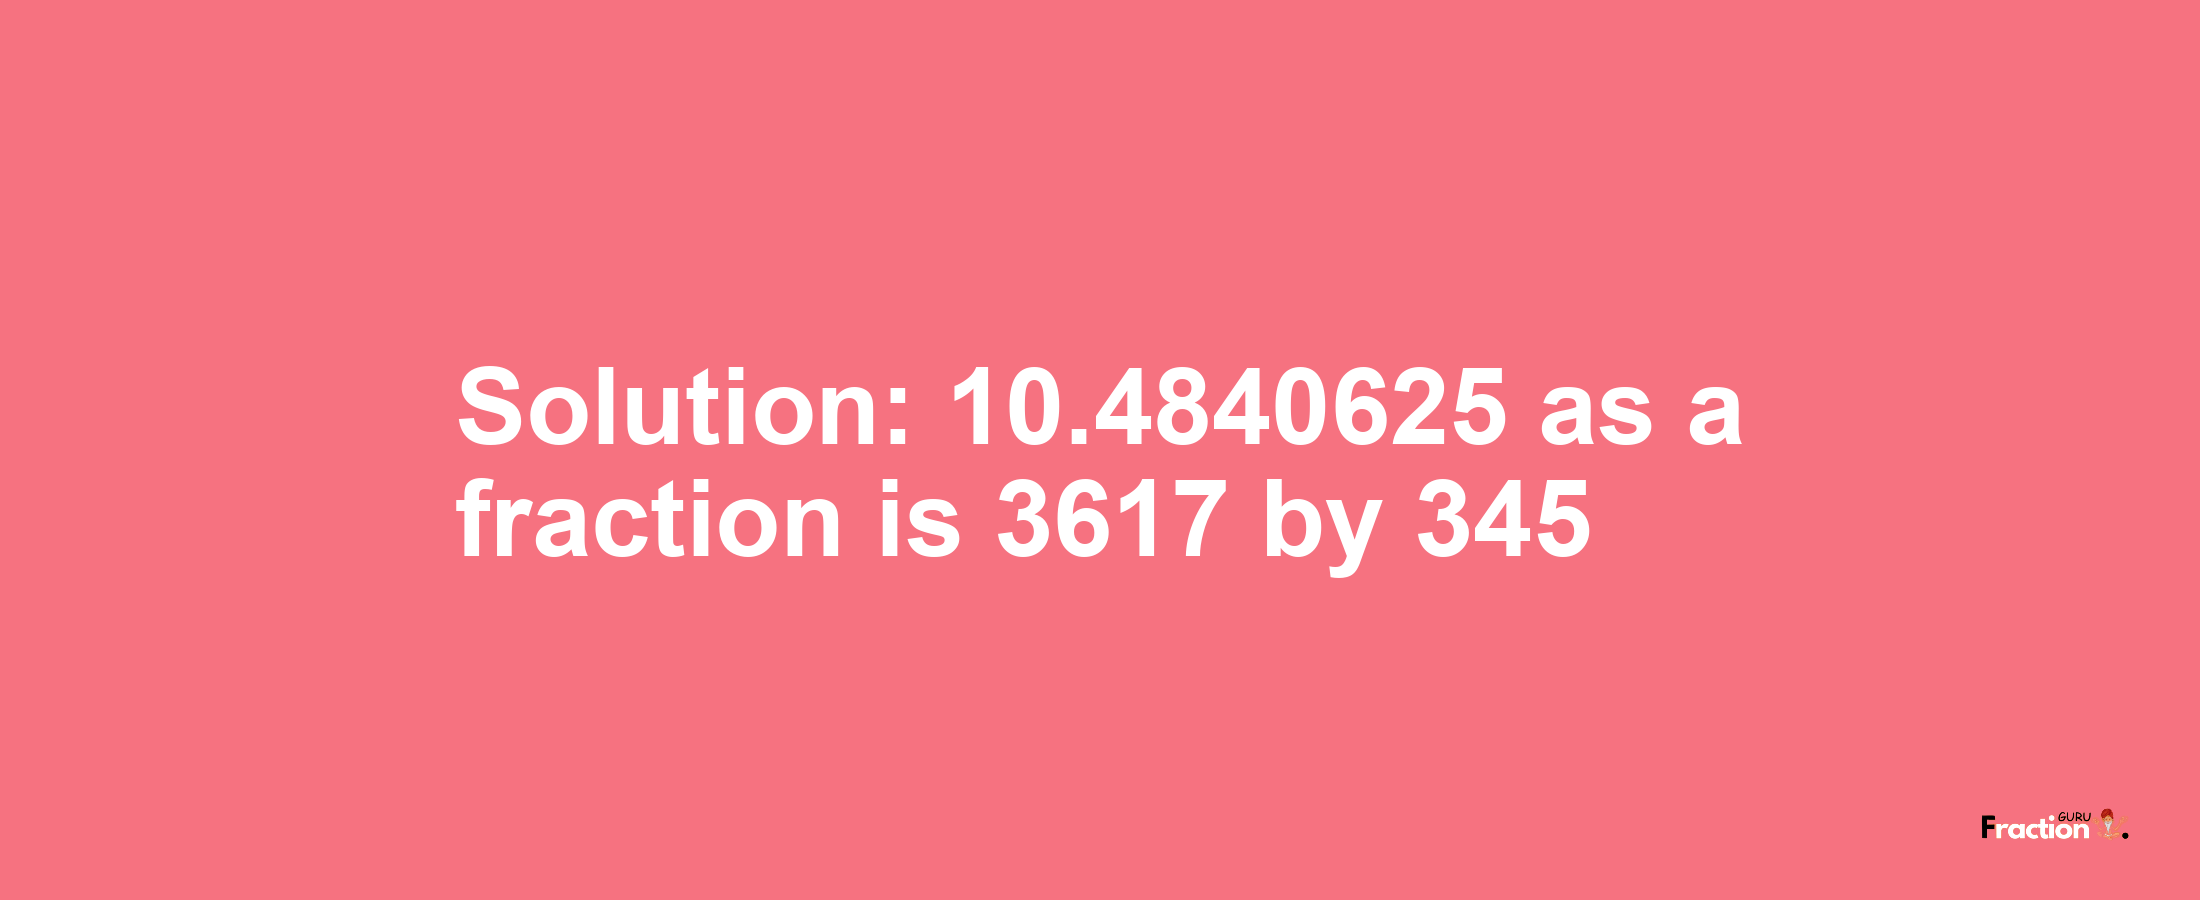 Solution:10.4840625 as a fraction is 3617/345